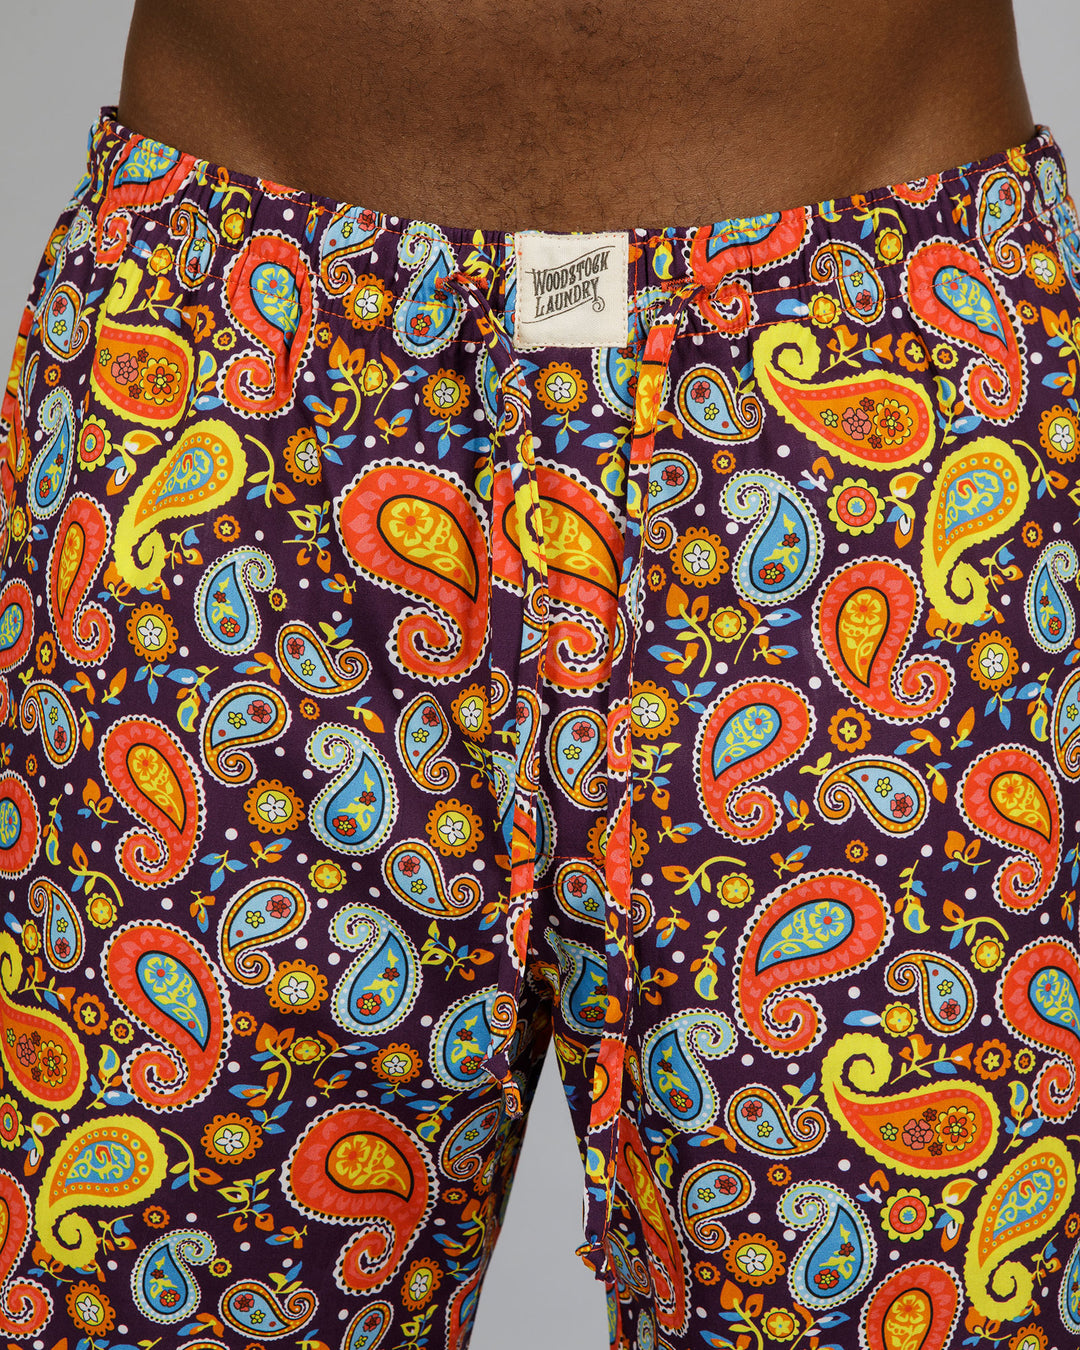 Mens Lounge Pants Sgt Peppers Close - Woodstock Laundry